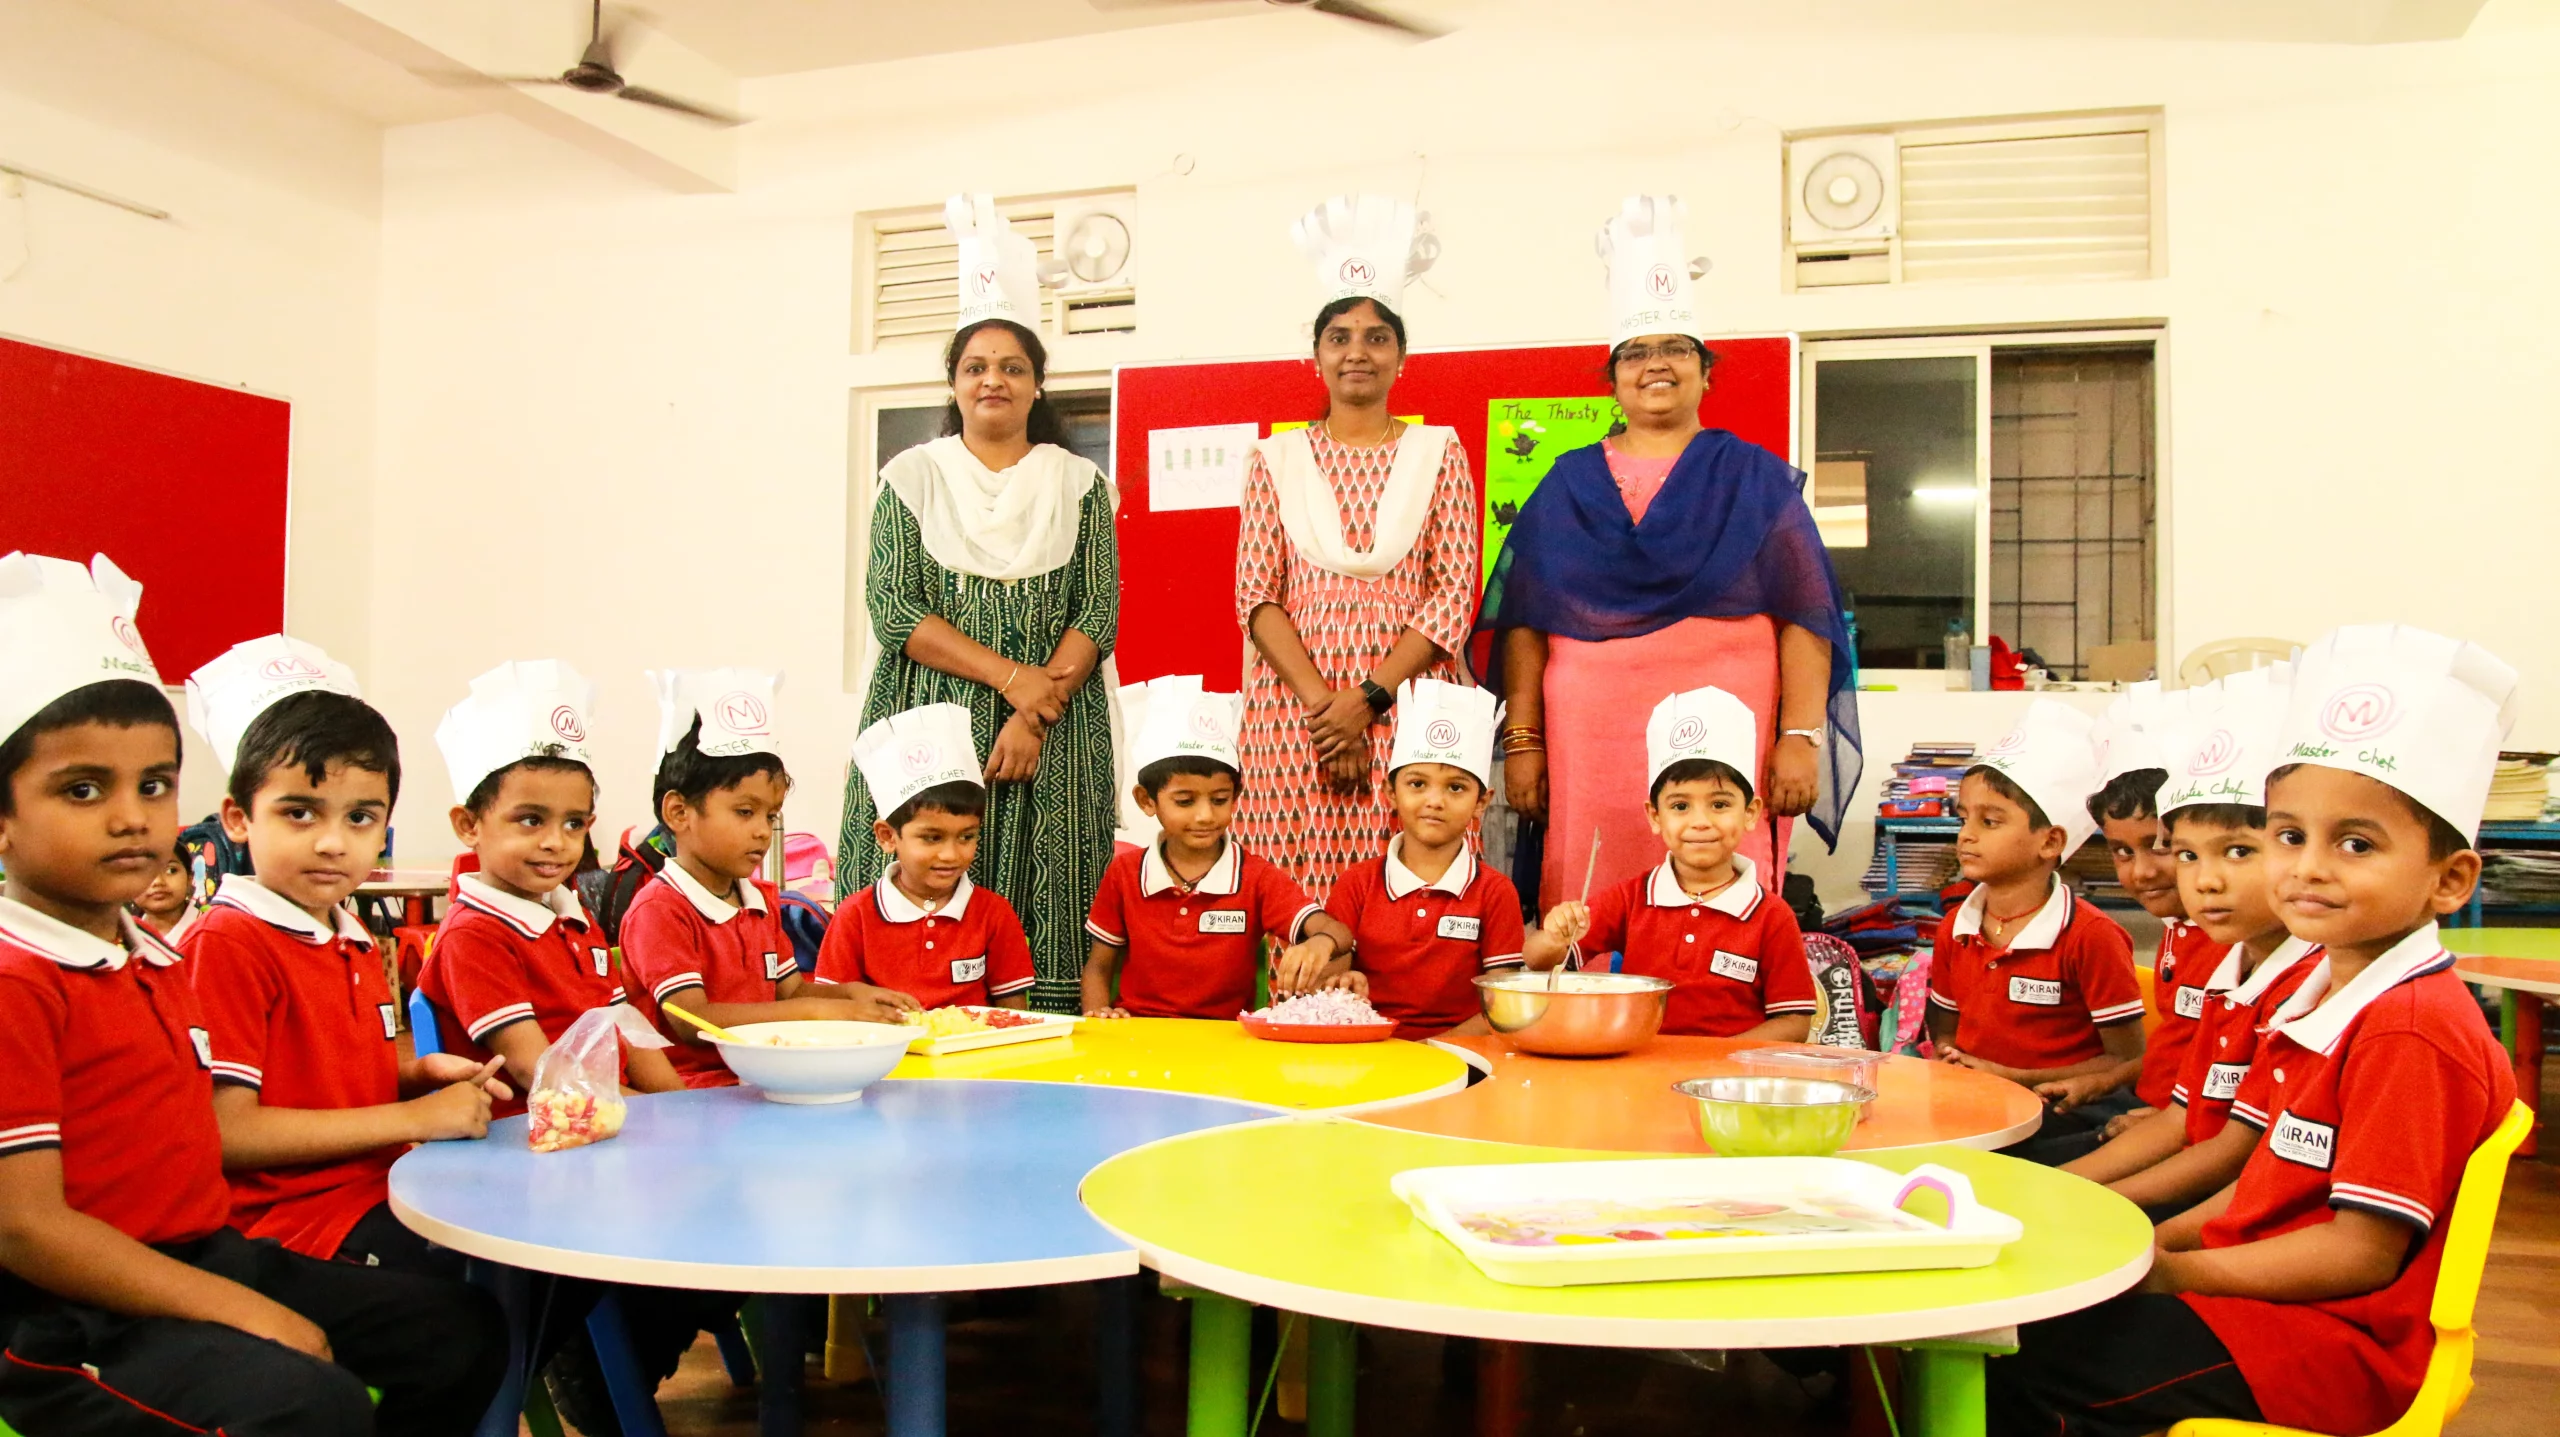 Young students engaged in a fireless cooking activity at Kiran International School's Pre-Primary section, learning culinary skills in a safe and supervised environment.